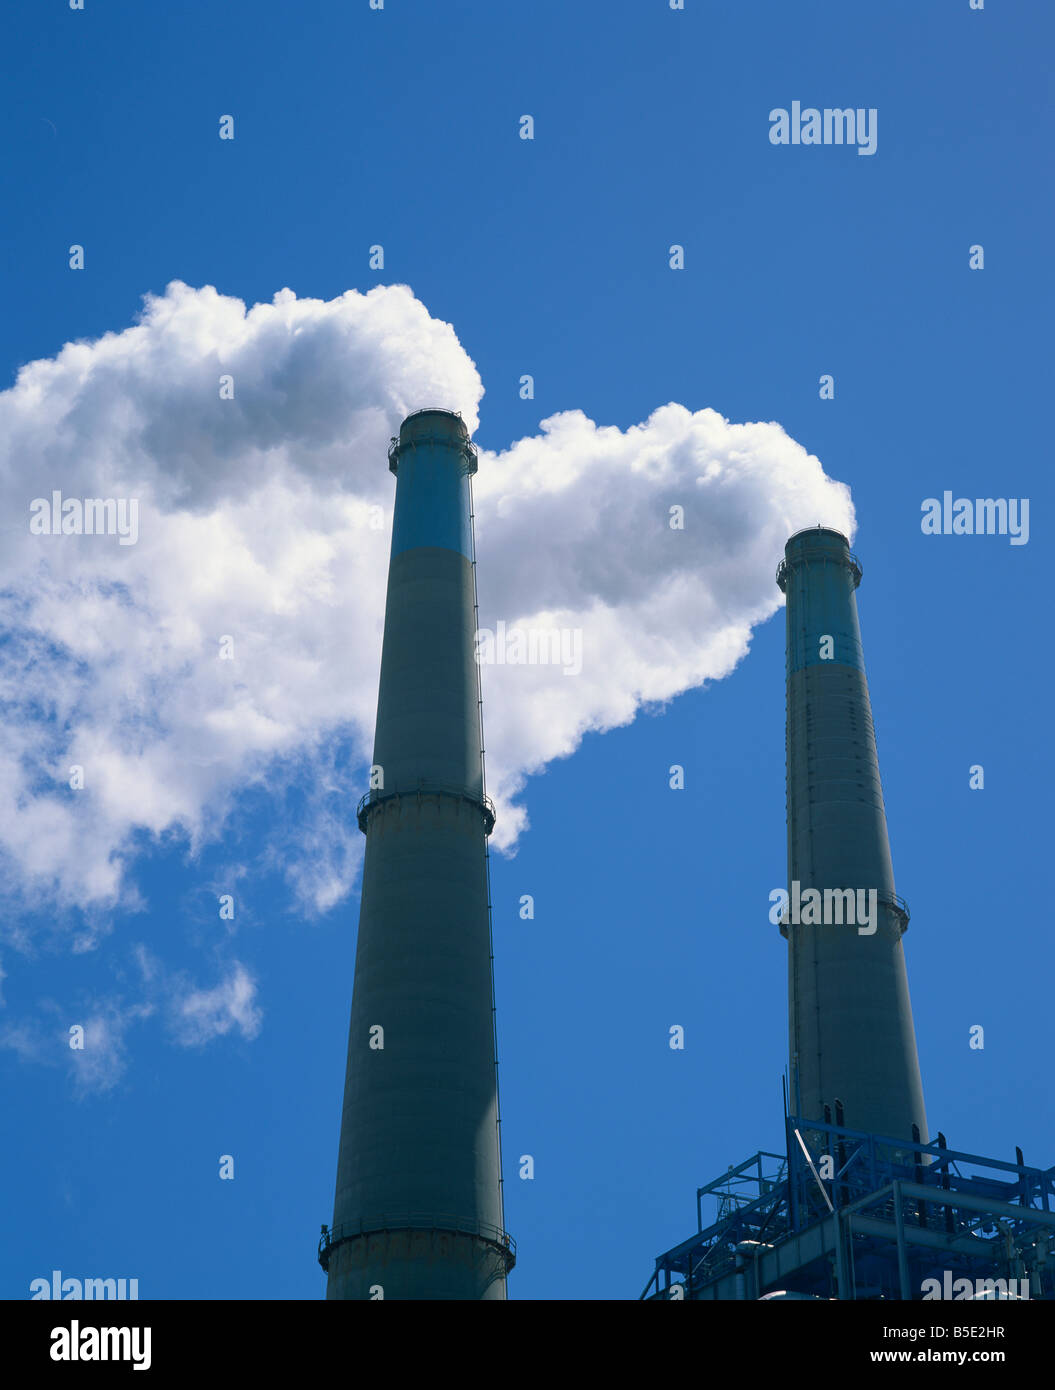 Pollution from smoking chimneys in California USA R Rainford Stock Photo